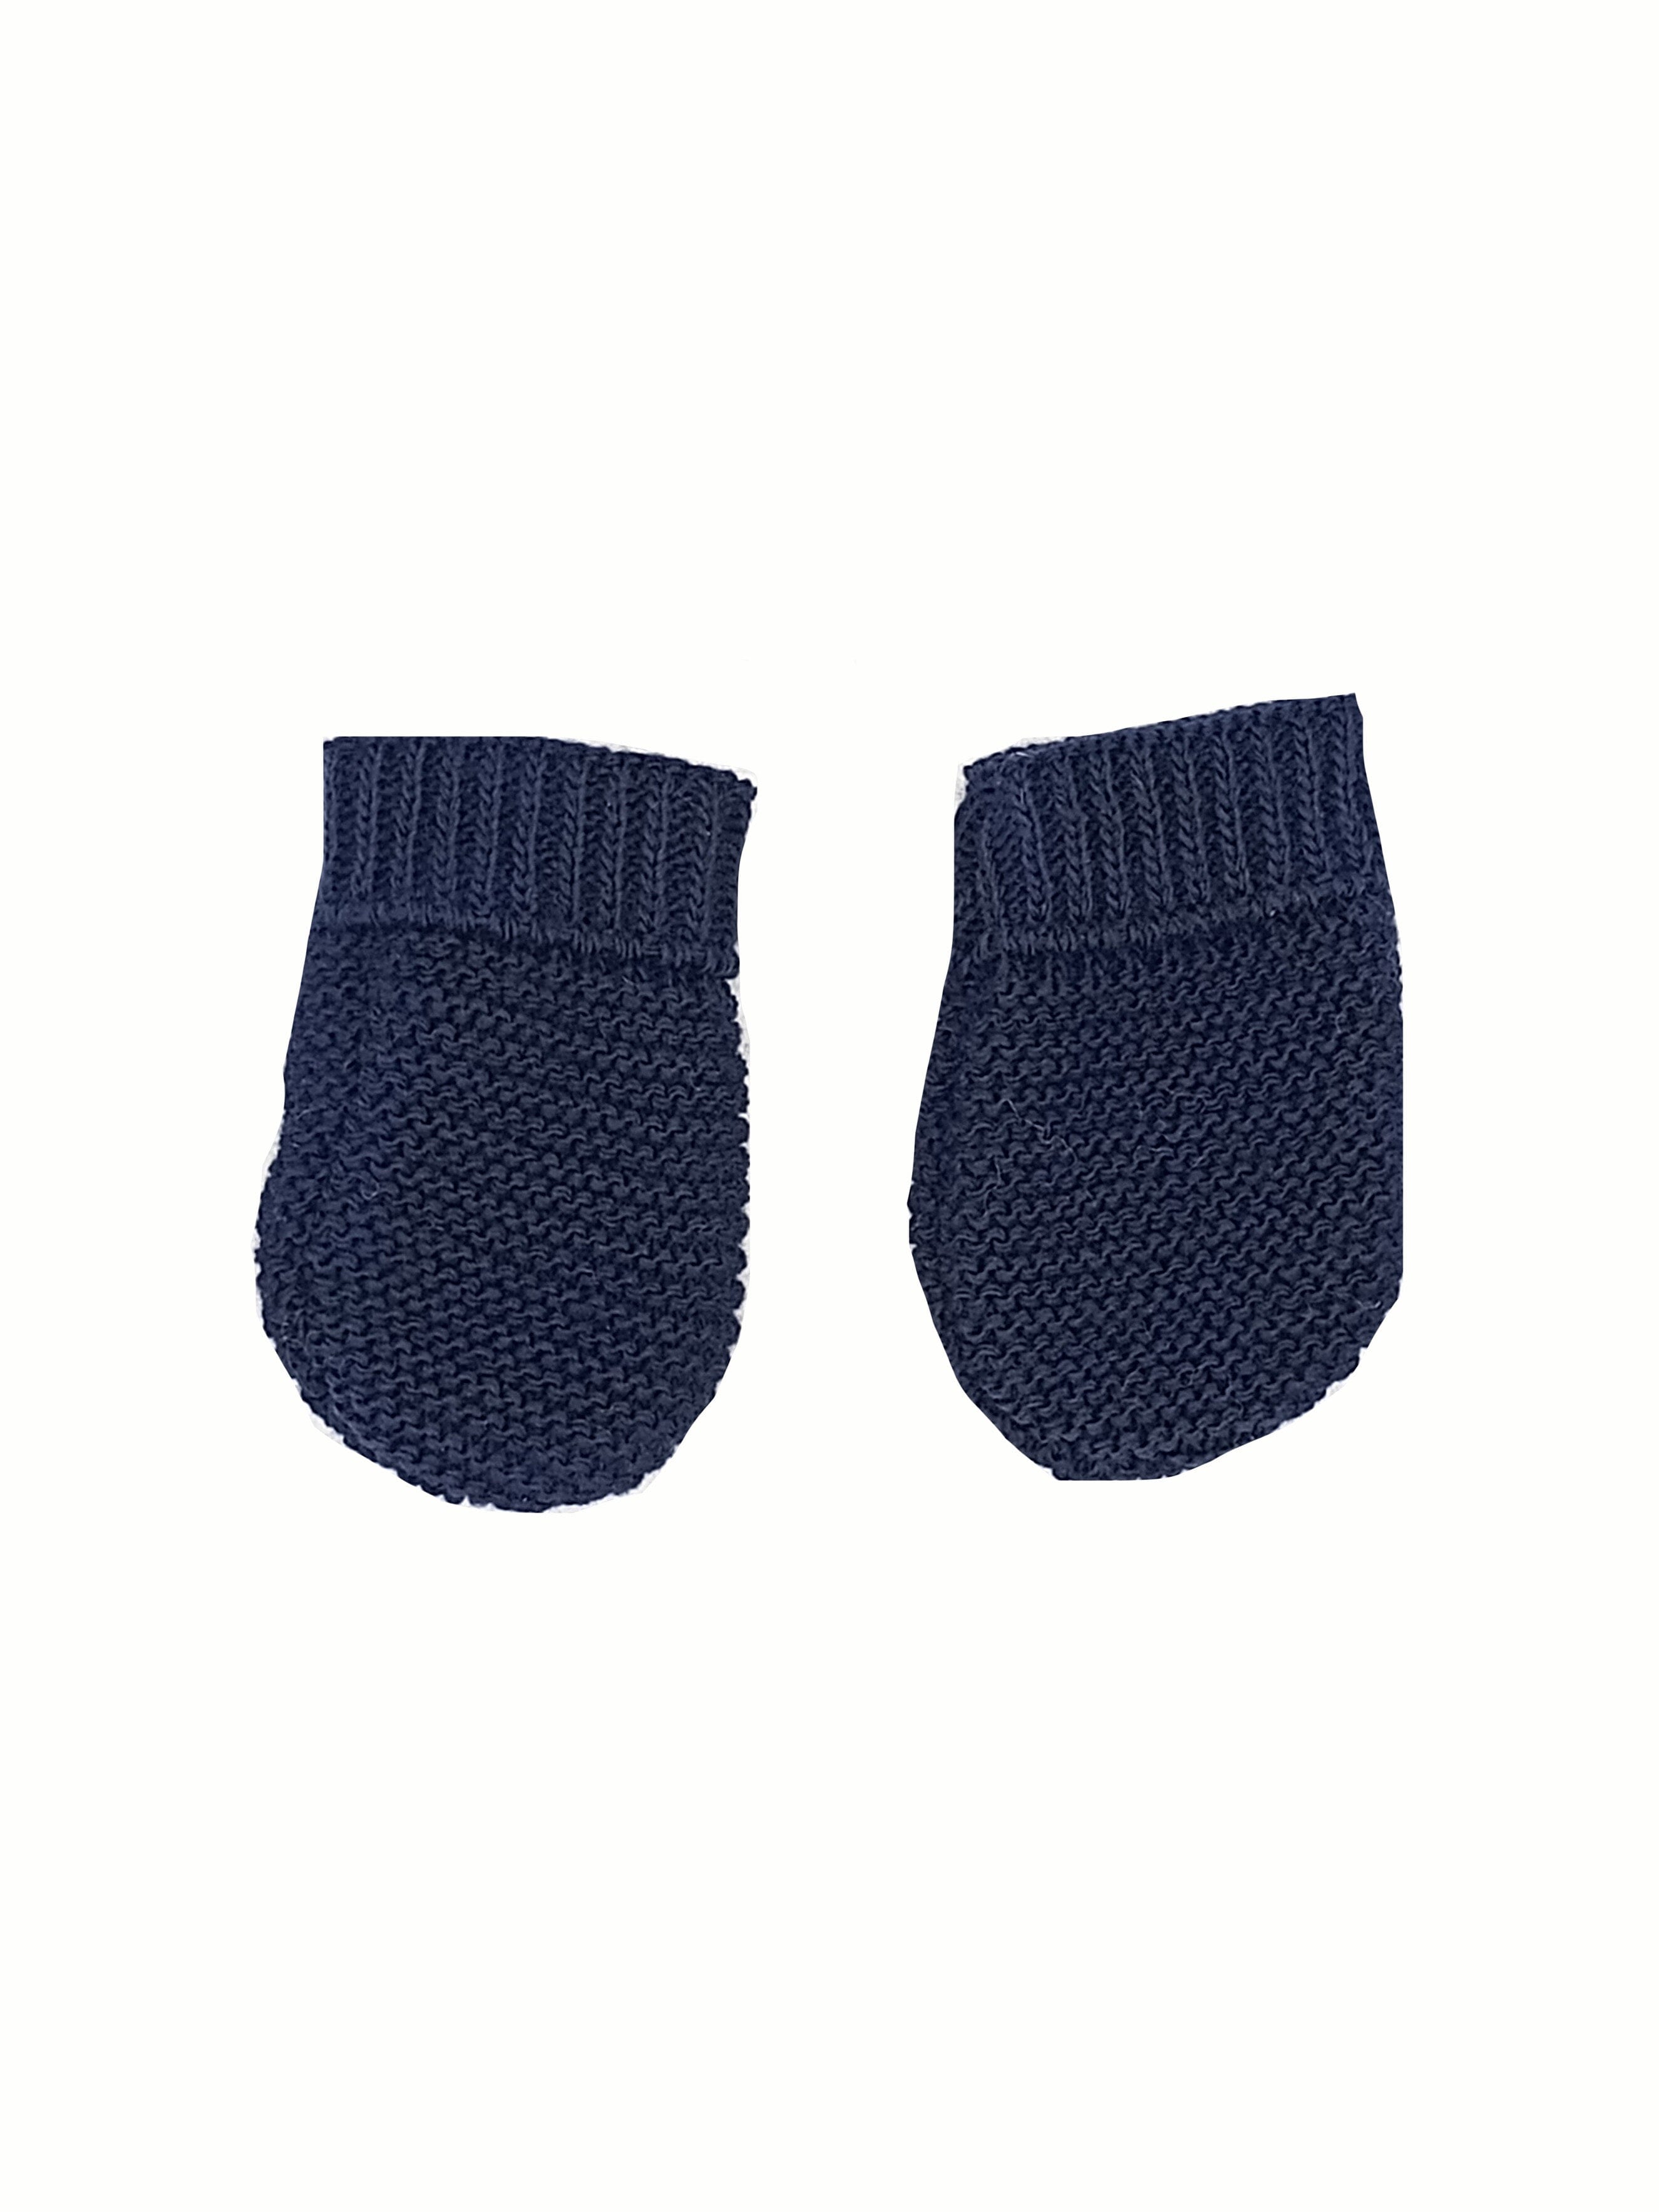 Navy Knitted Gloves/Mittens Mittens La Manufacture de Layette 